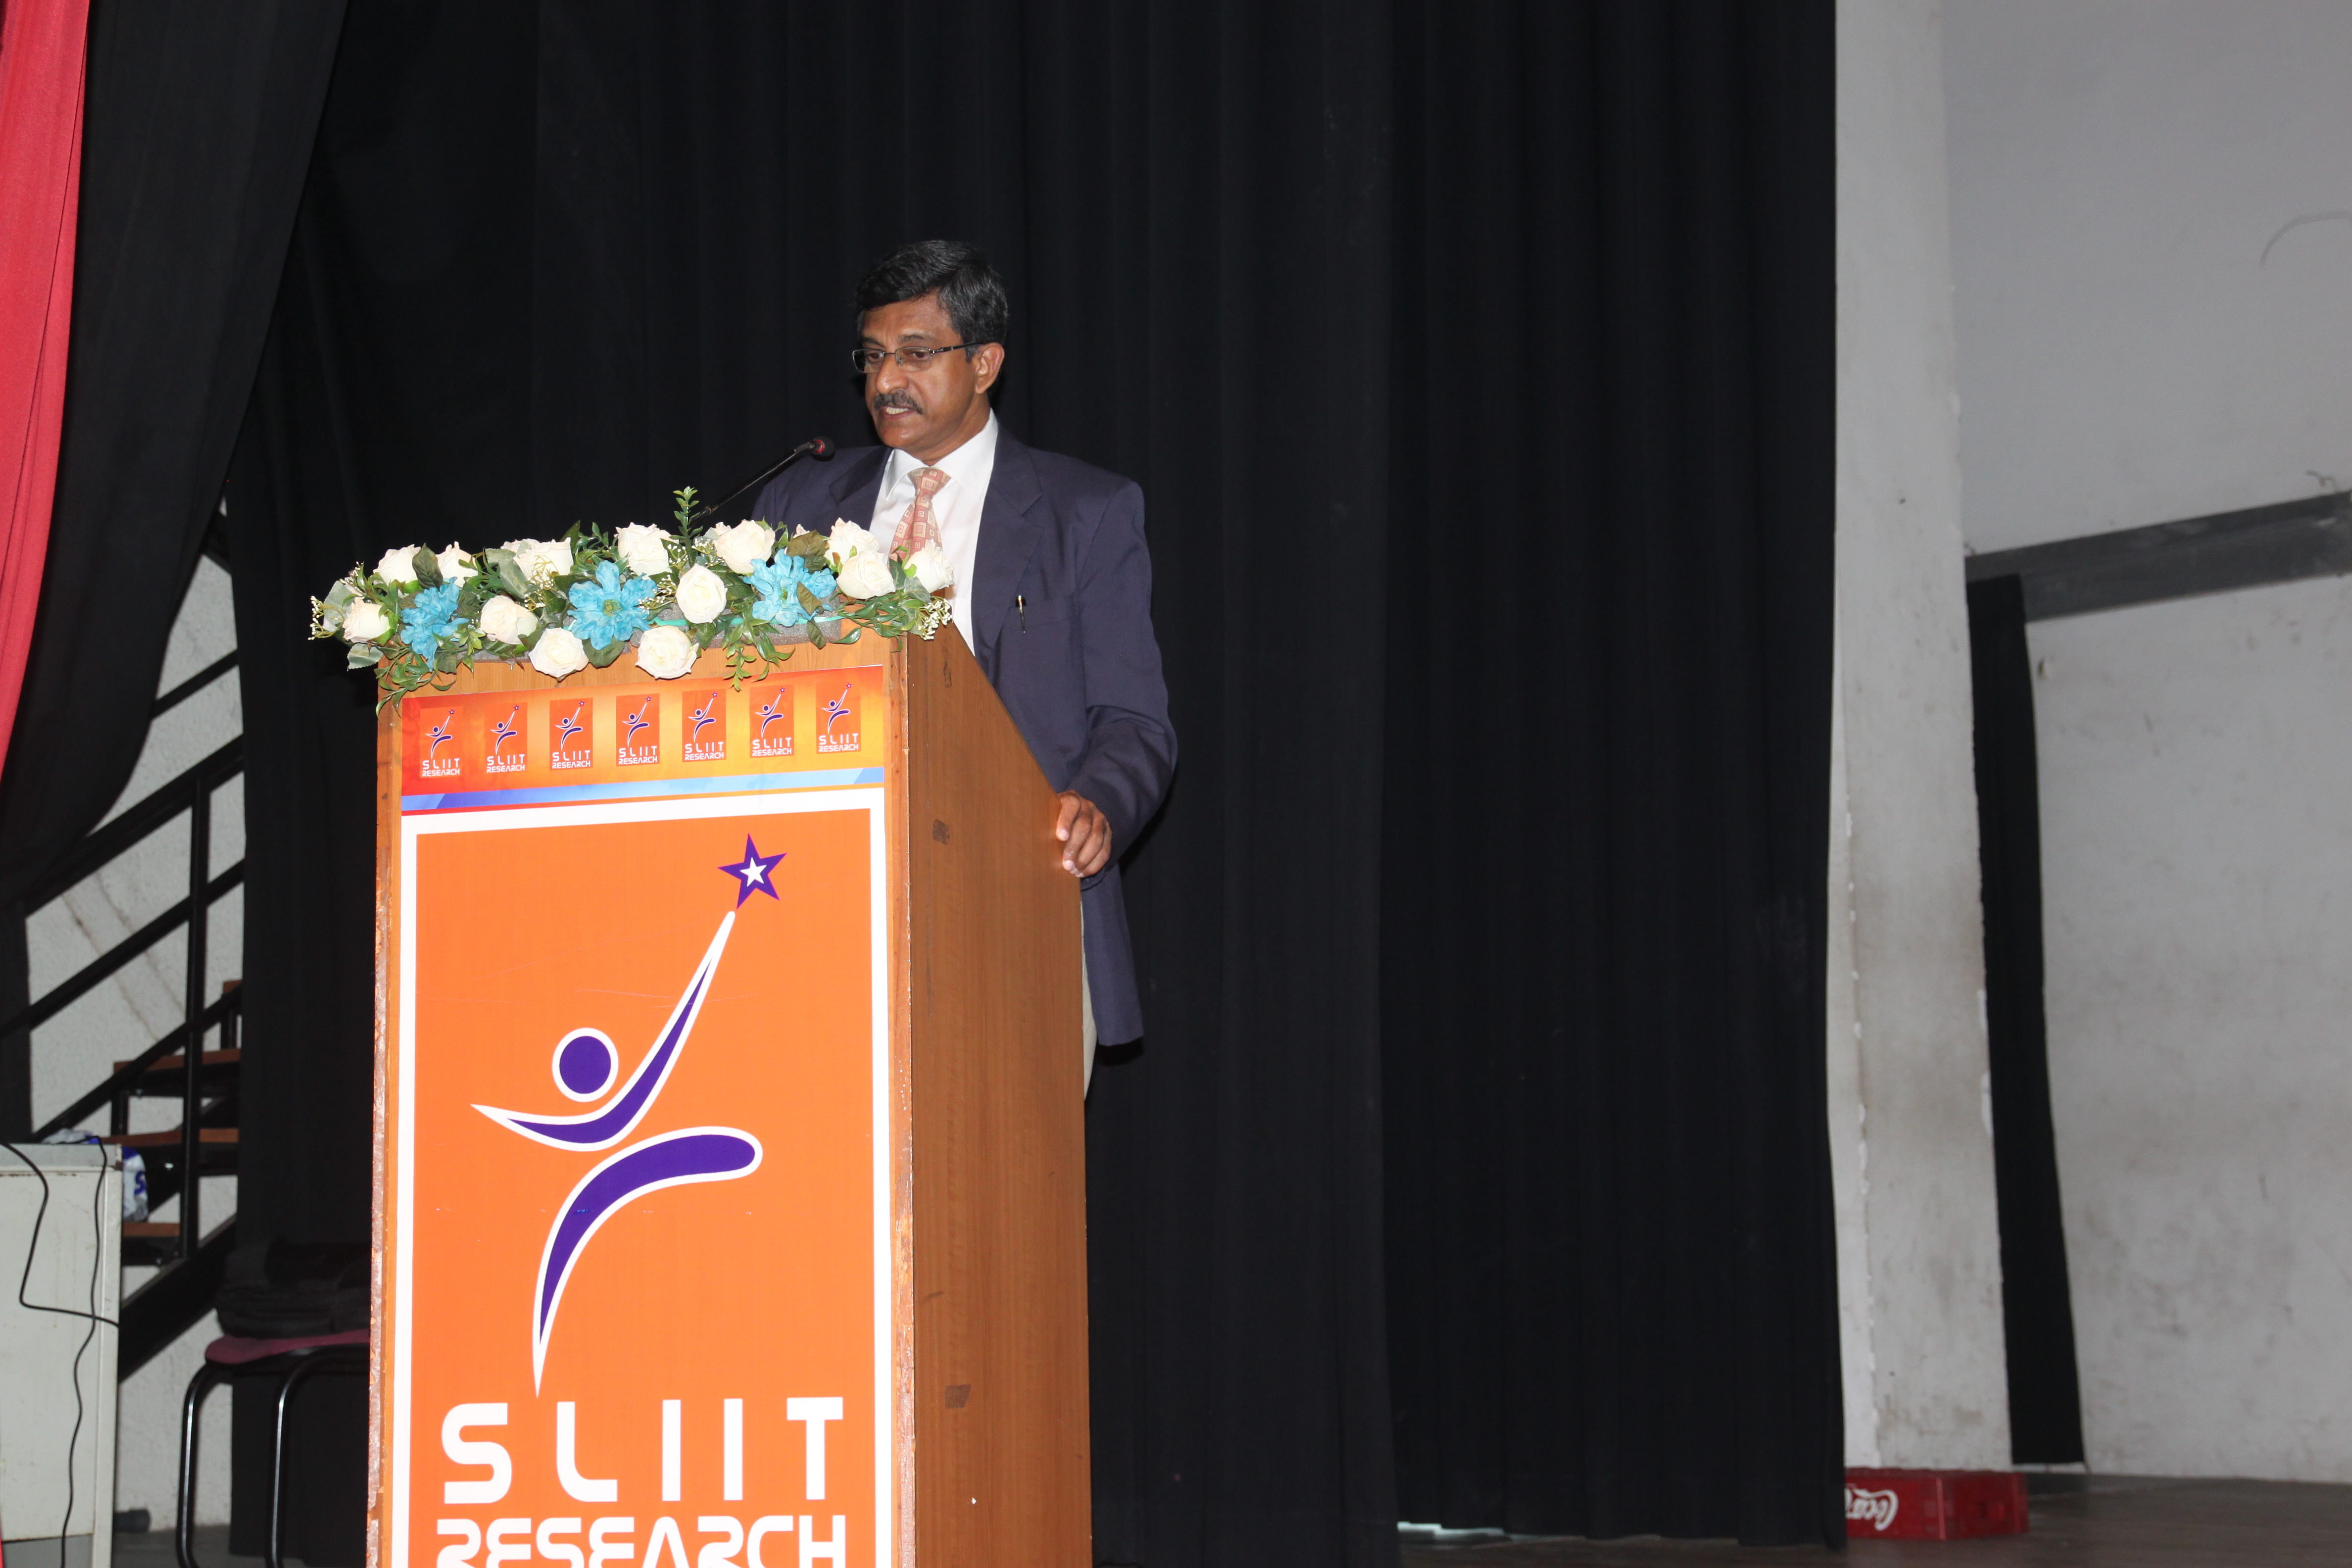 4th National Conference on Technology and Management (4th NCTM) SLIIT